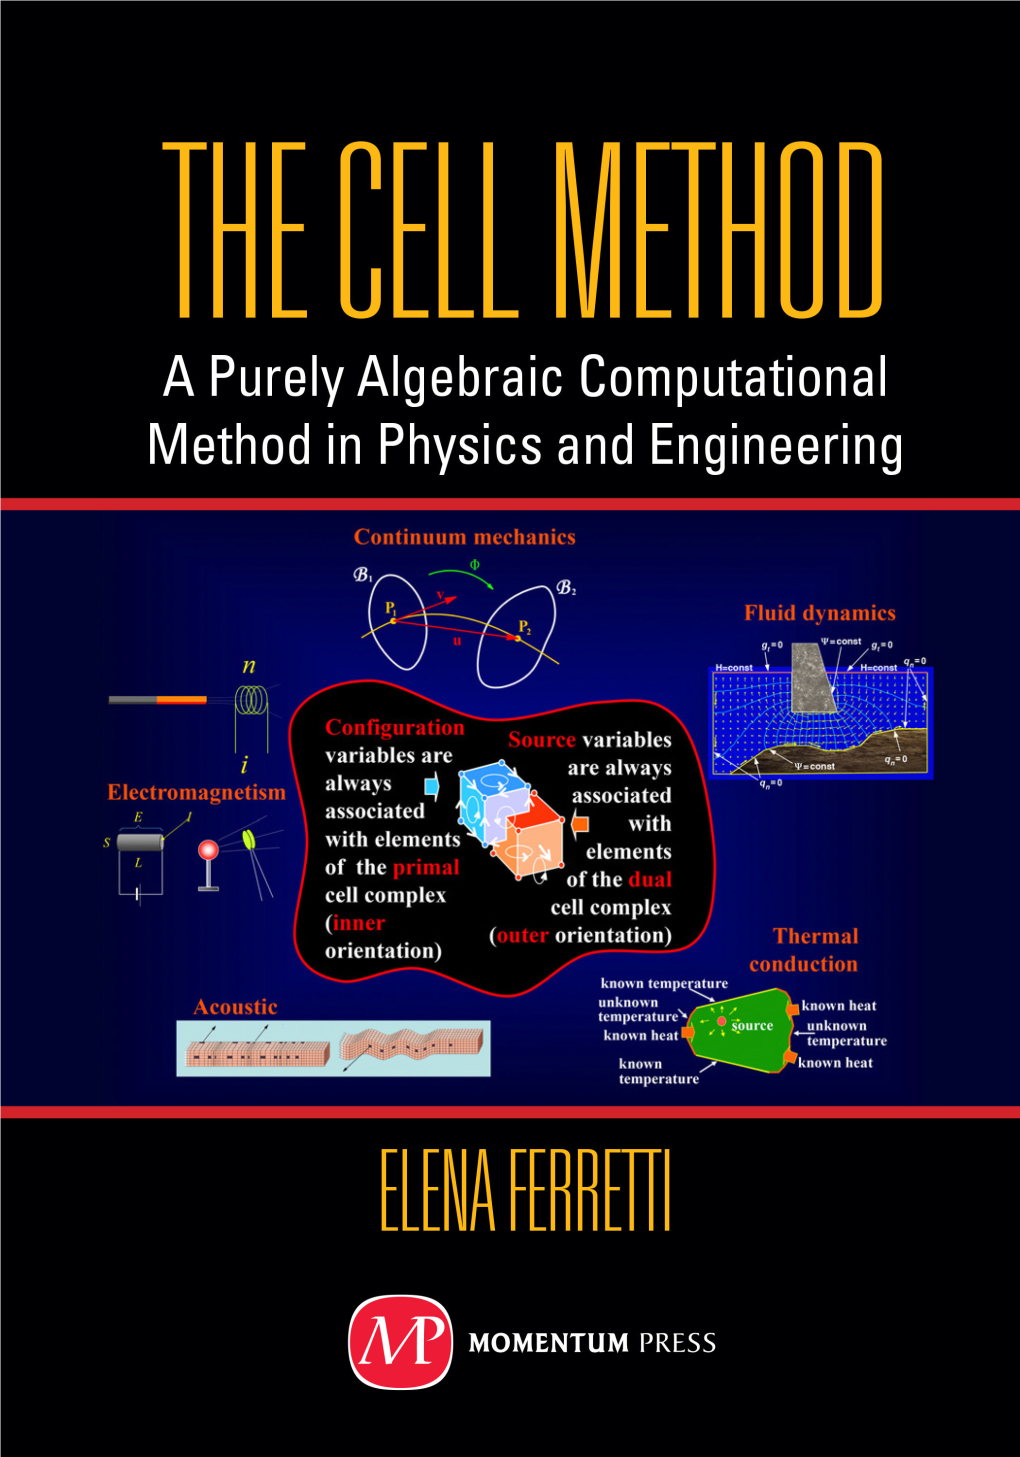 The Cell Method: a Purely Algebraic Computational Method in Physics and Engineering Copyright © Momentum Press®, LLC, 2014